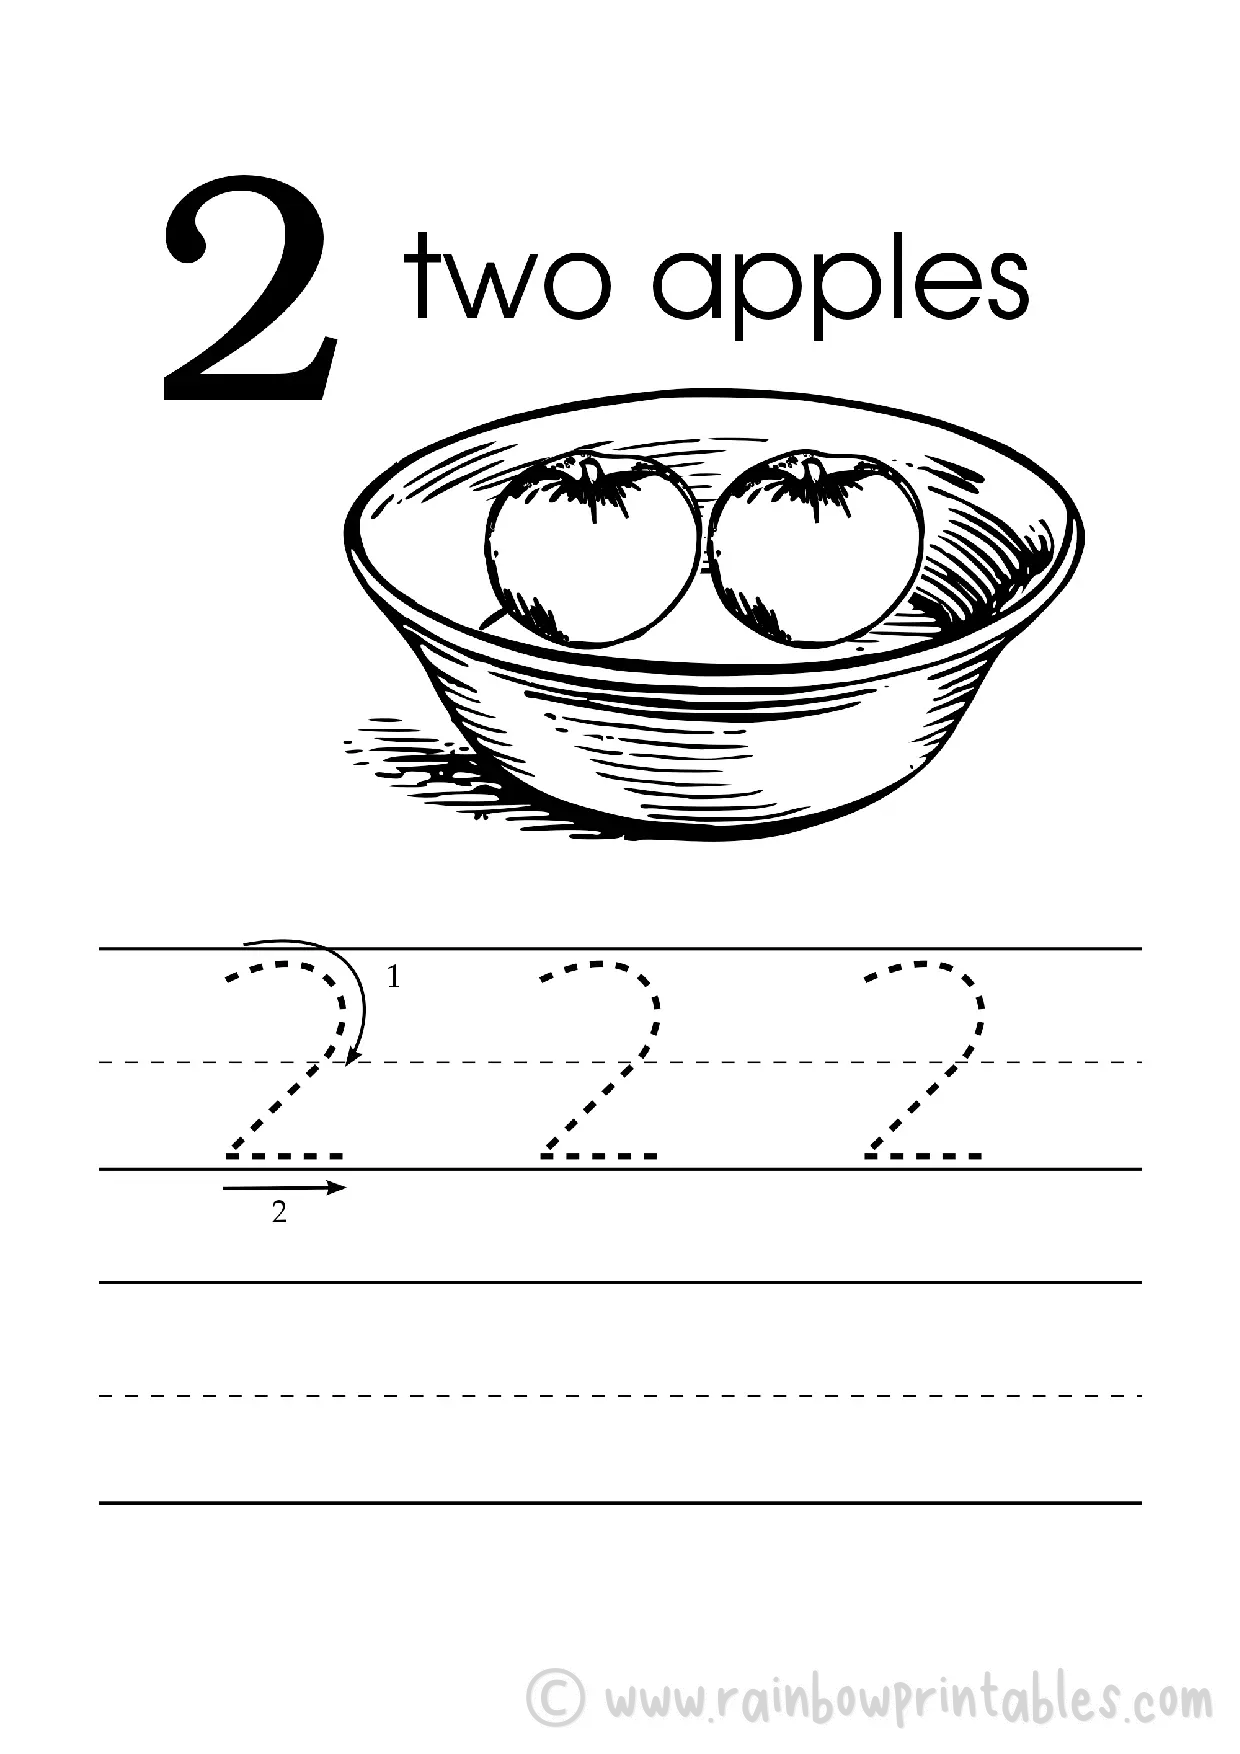 number-2-two-handwriting-worksheet-pre-school-level-with-apples-in-a-bowl-puzzle-game_01